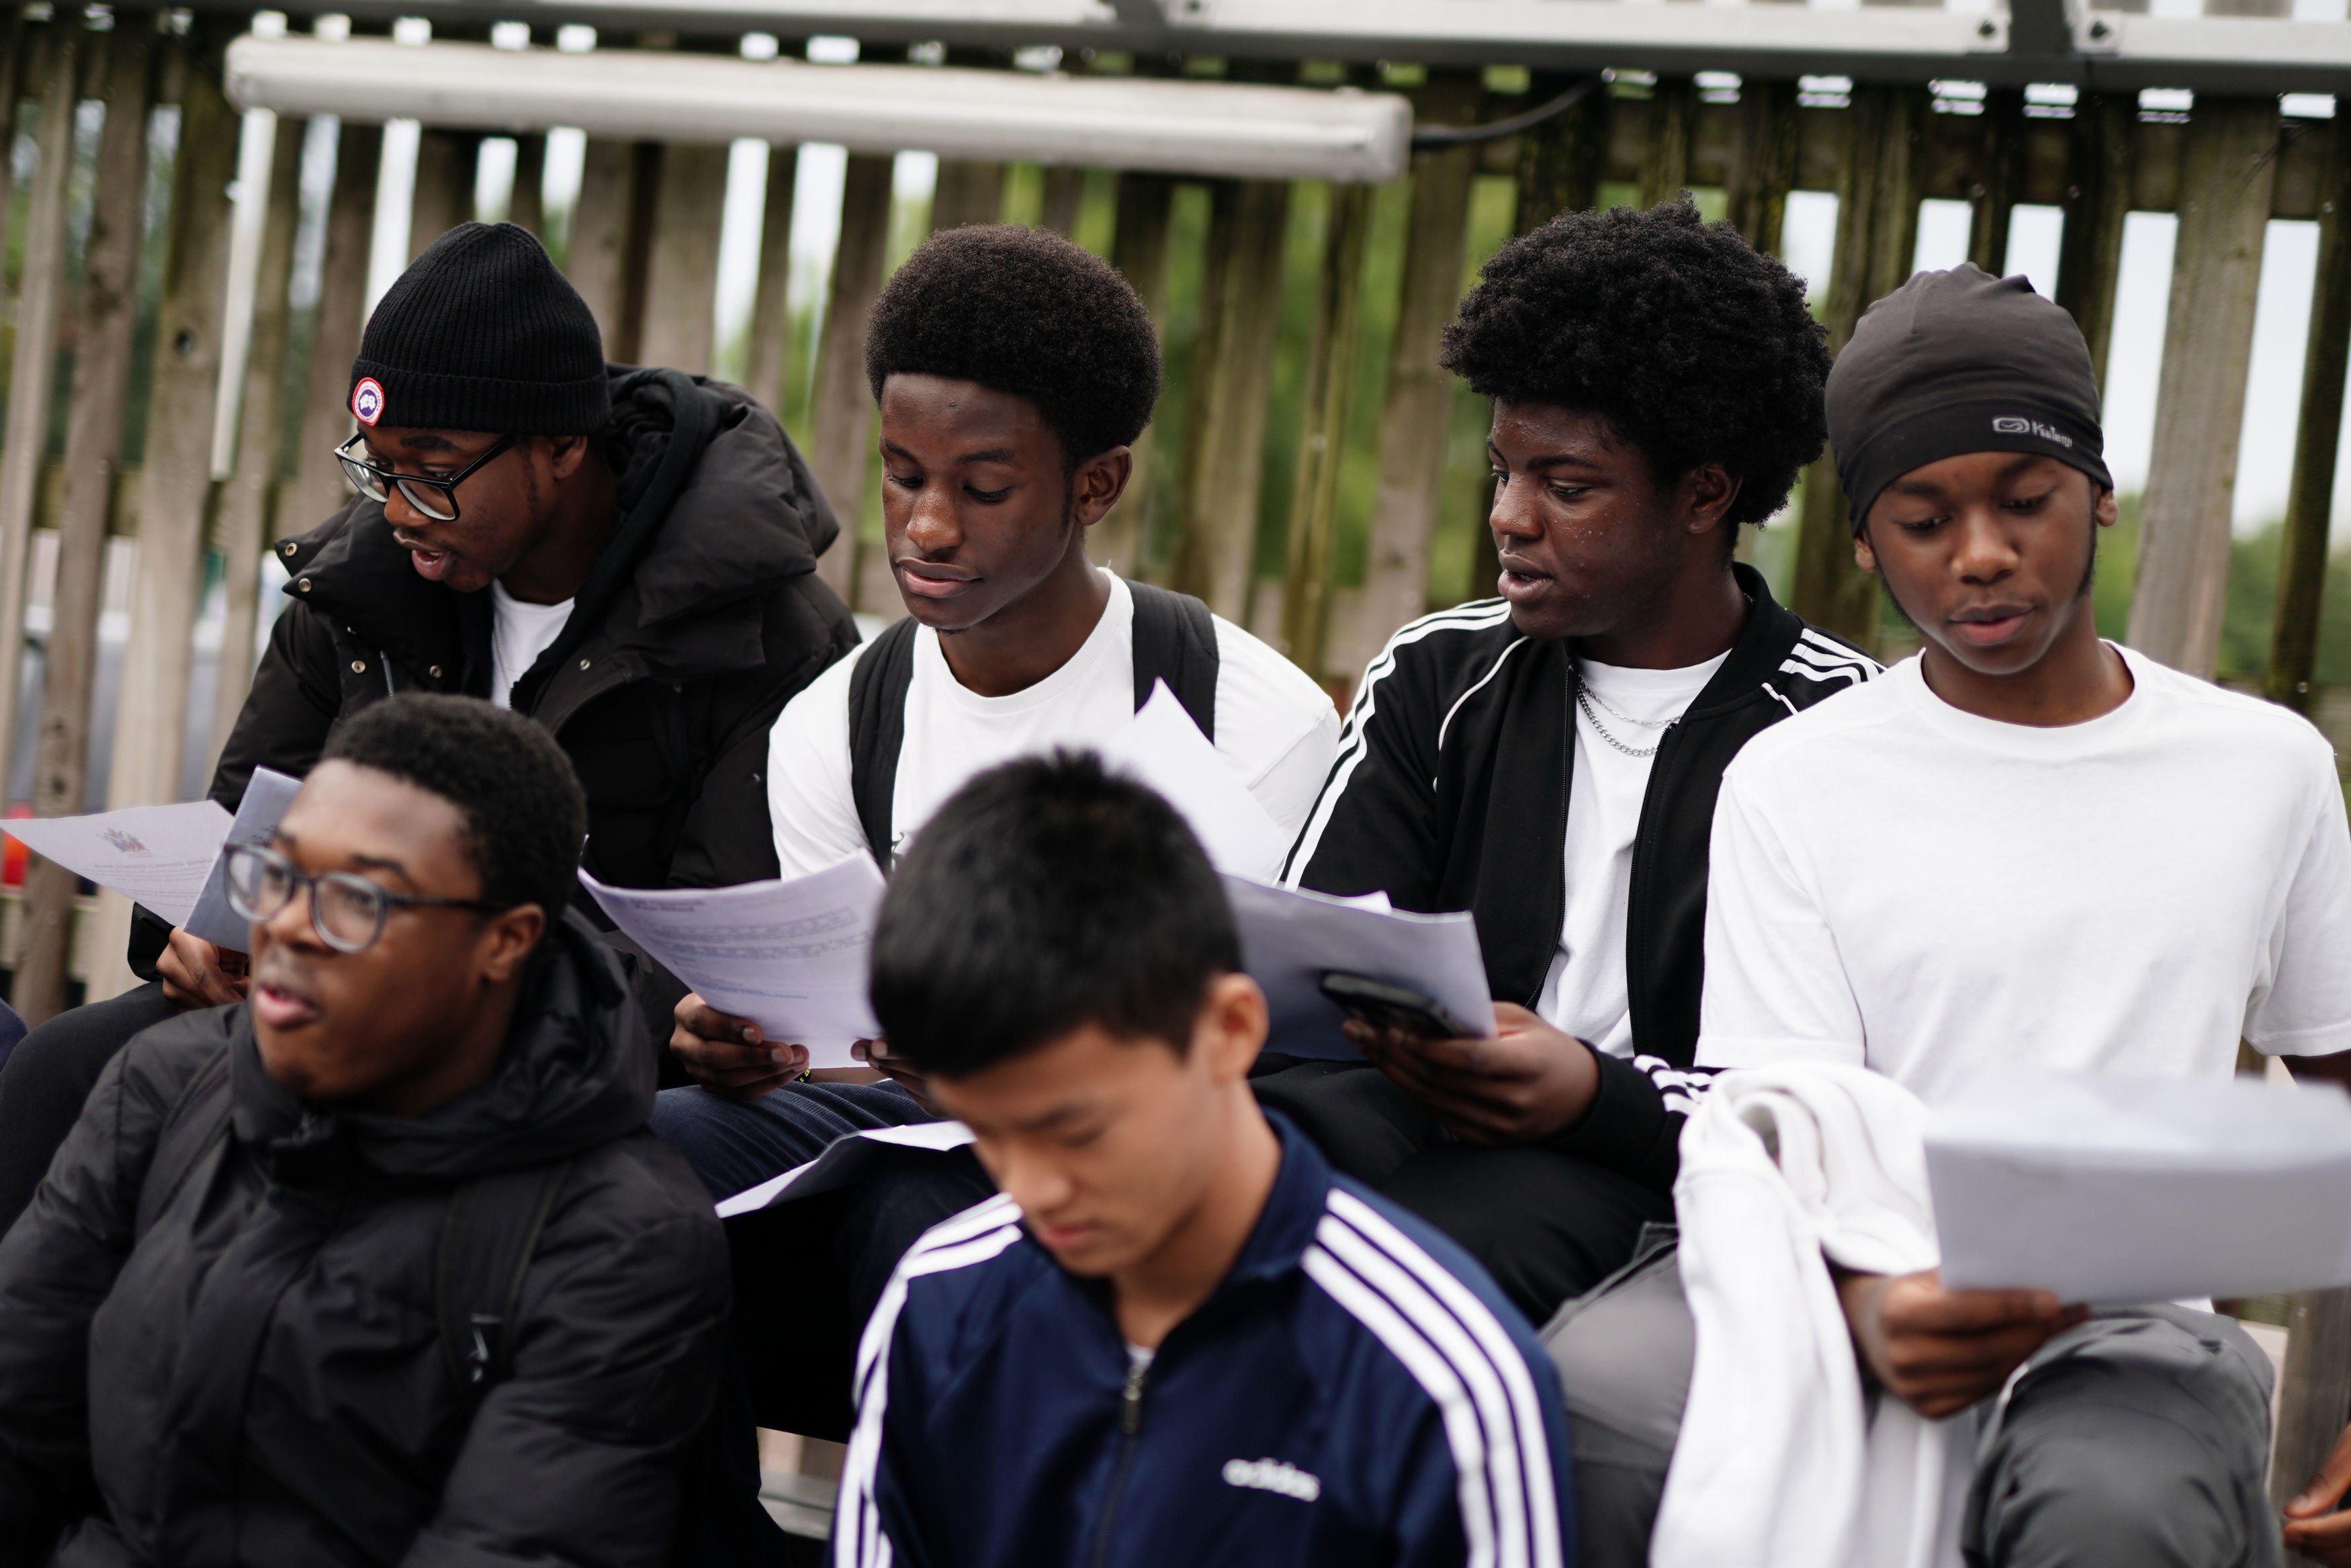 Pupils at Ark Greenwich Free School, London, receiving their GCSE results